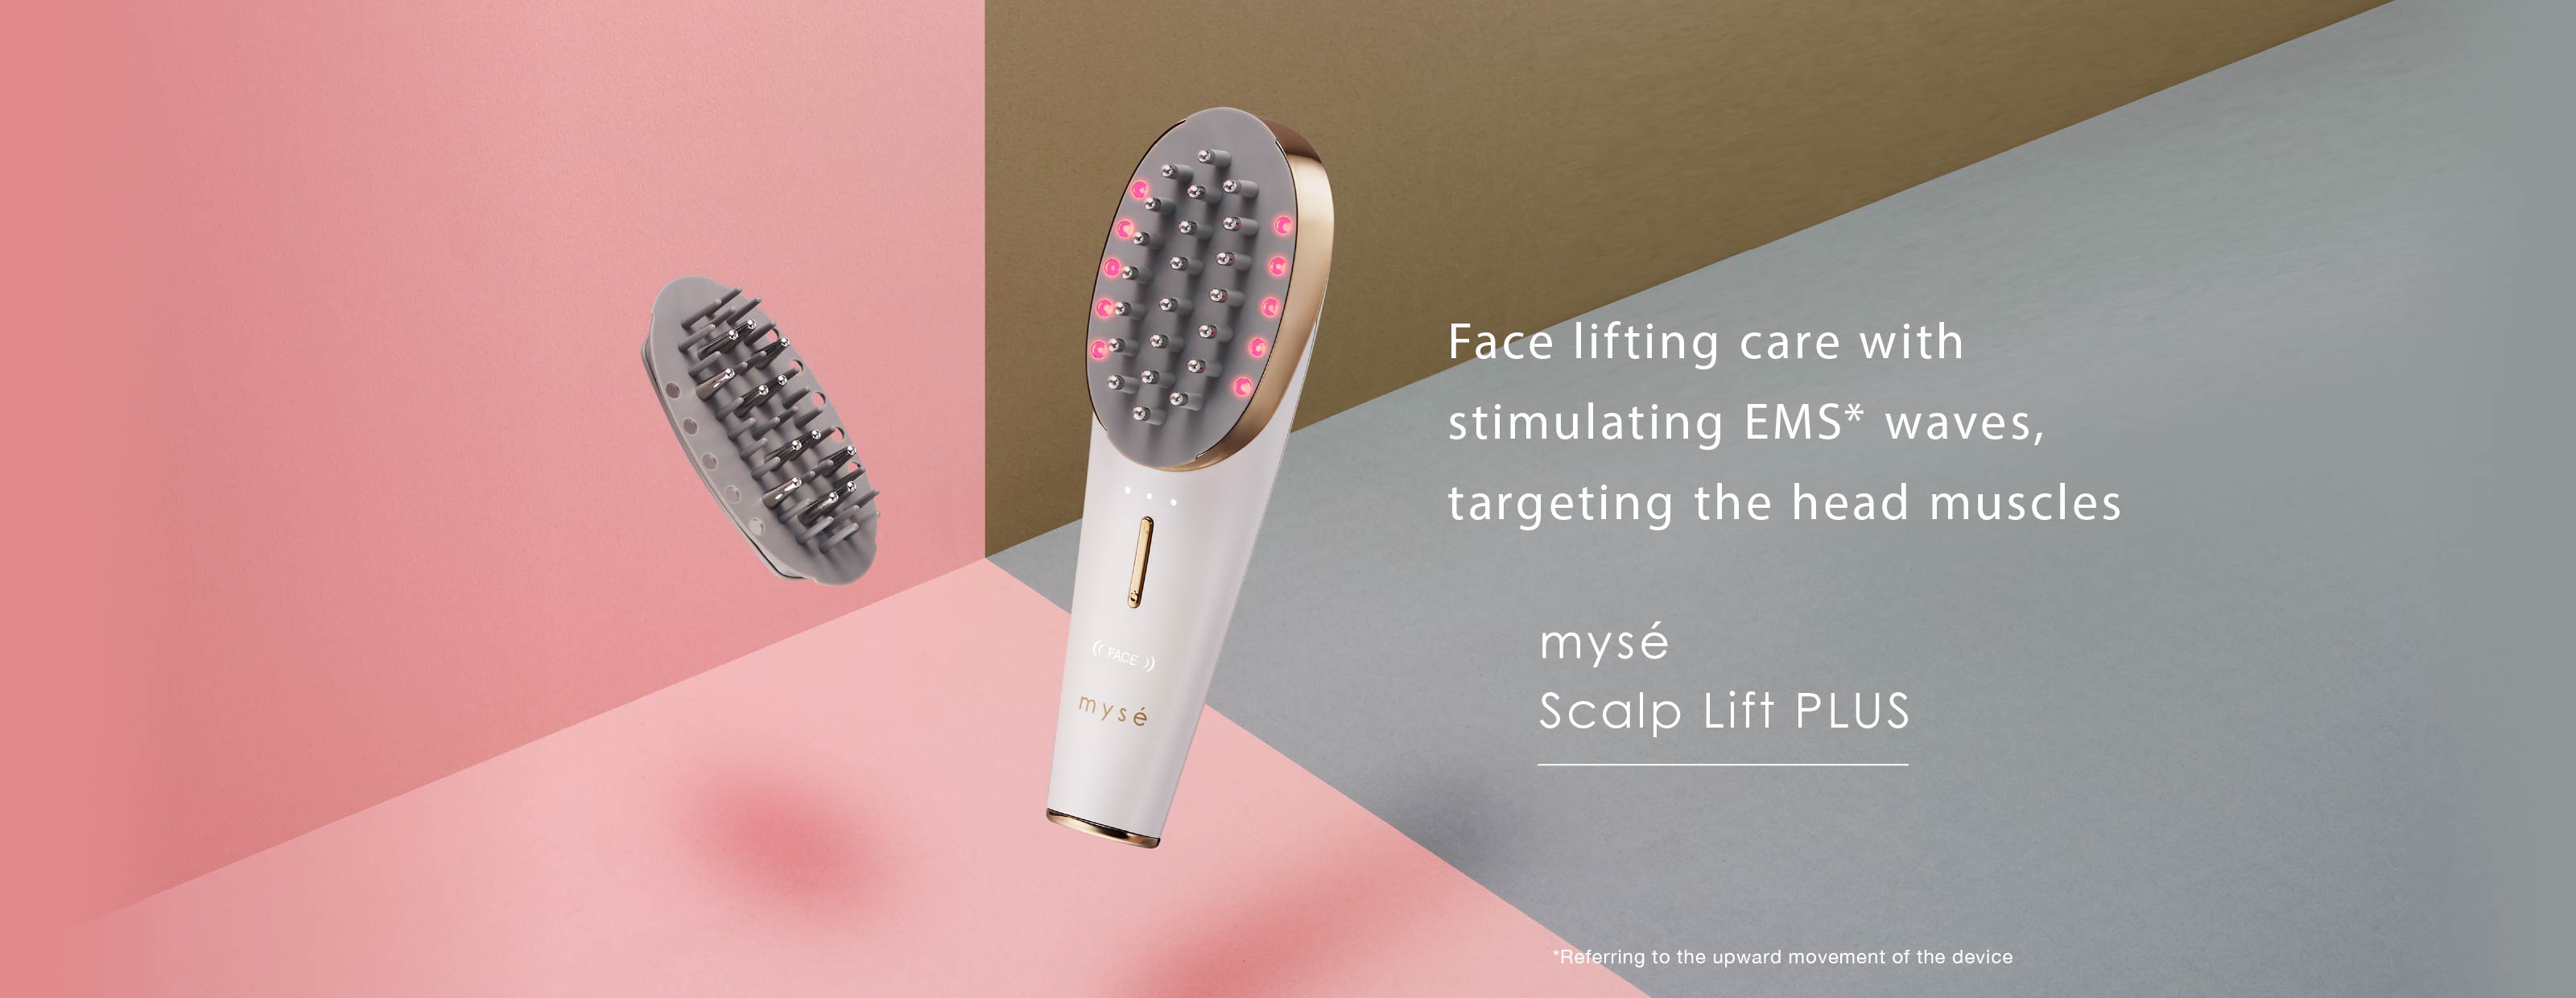 myse Scalp Lift PLUS Face lifting care while stimulating the “head muscles” with EMS